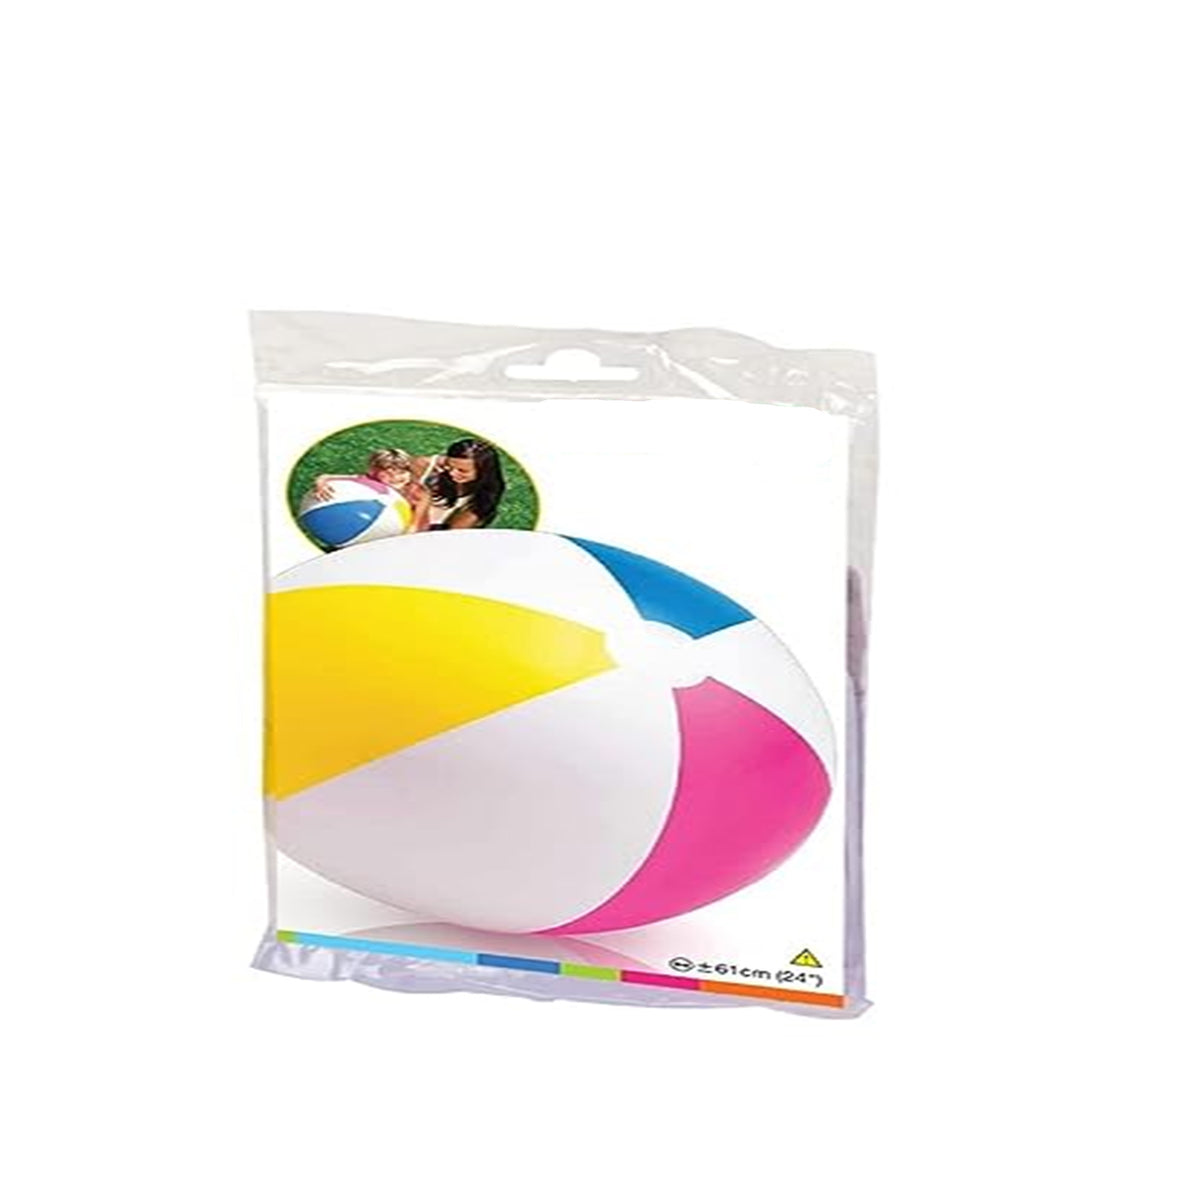 Inflatable Beach Ball kids Toys In Bulk- Assorted